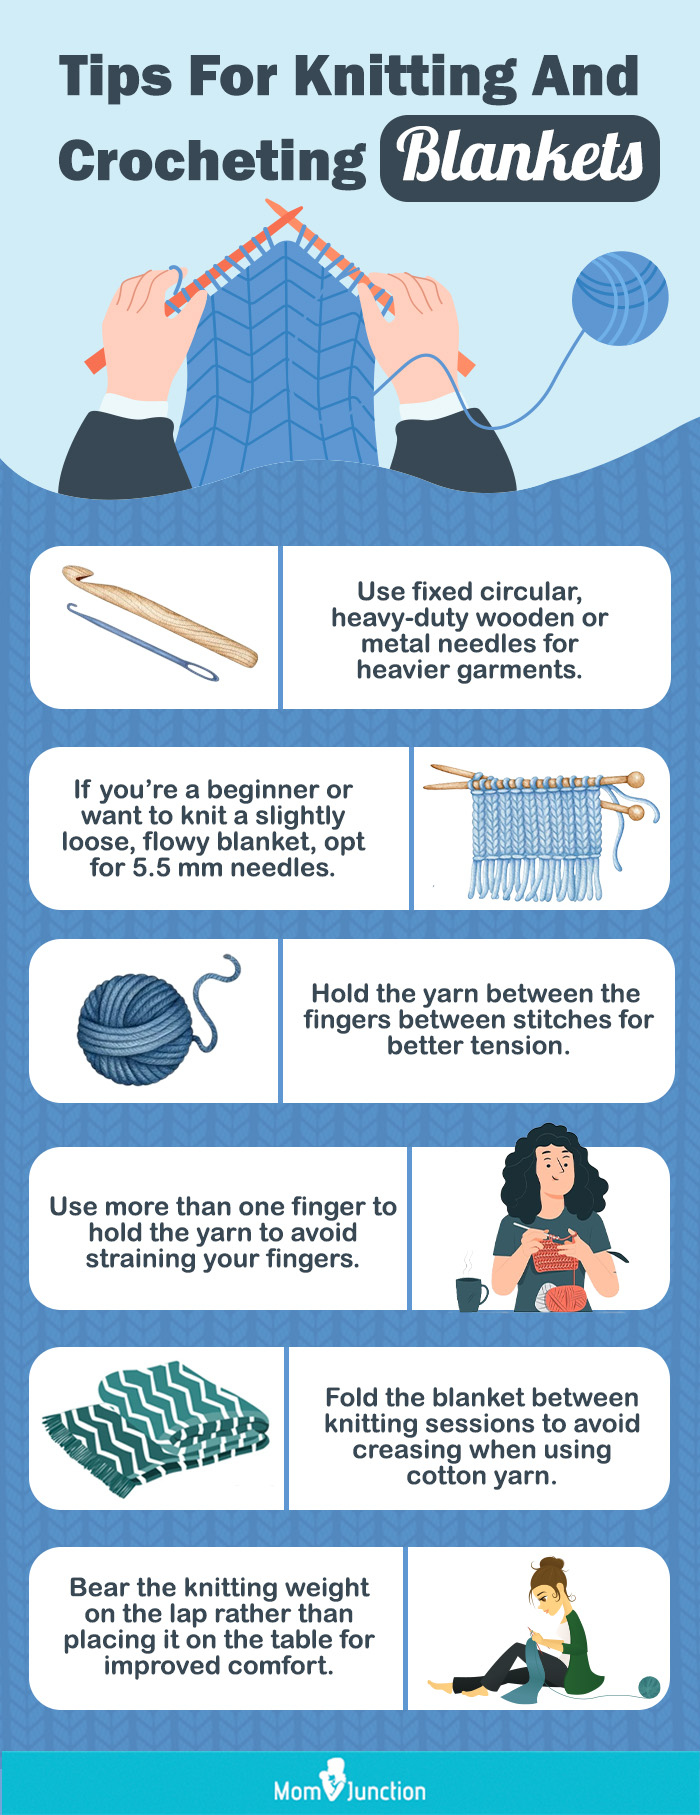 Tips For Knitting And Crocheting Blankets